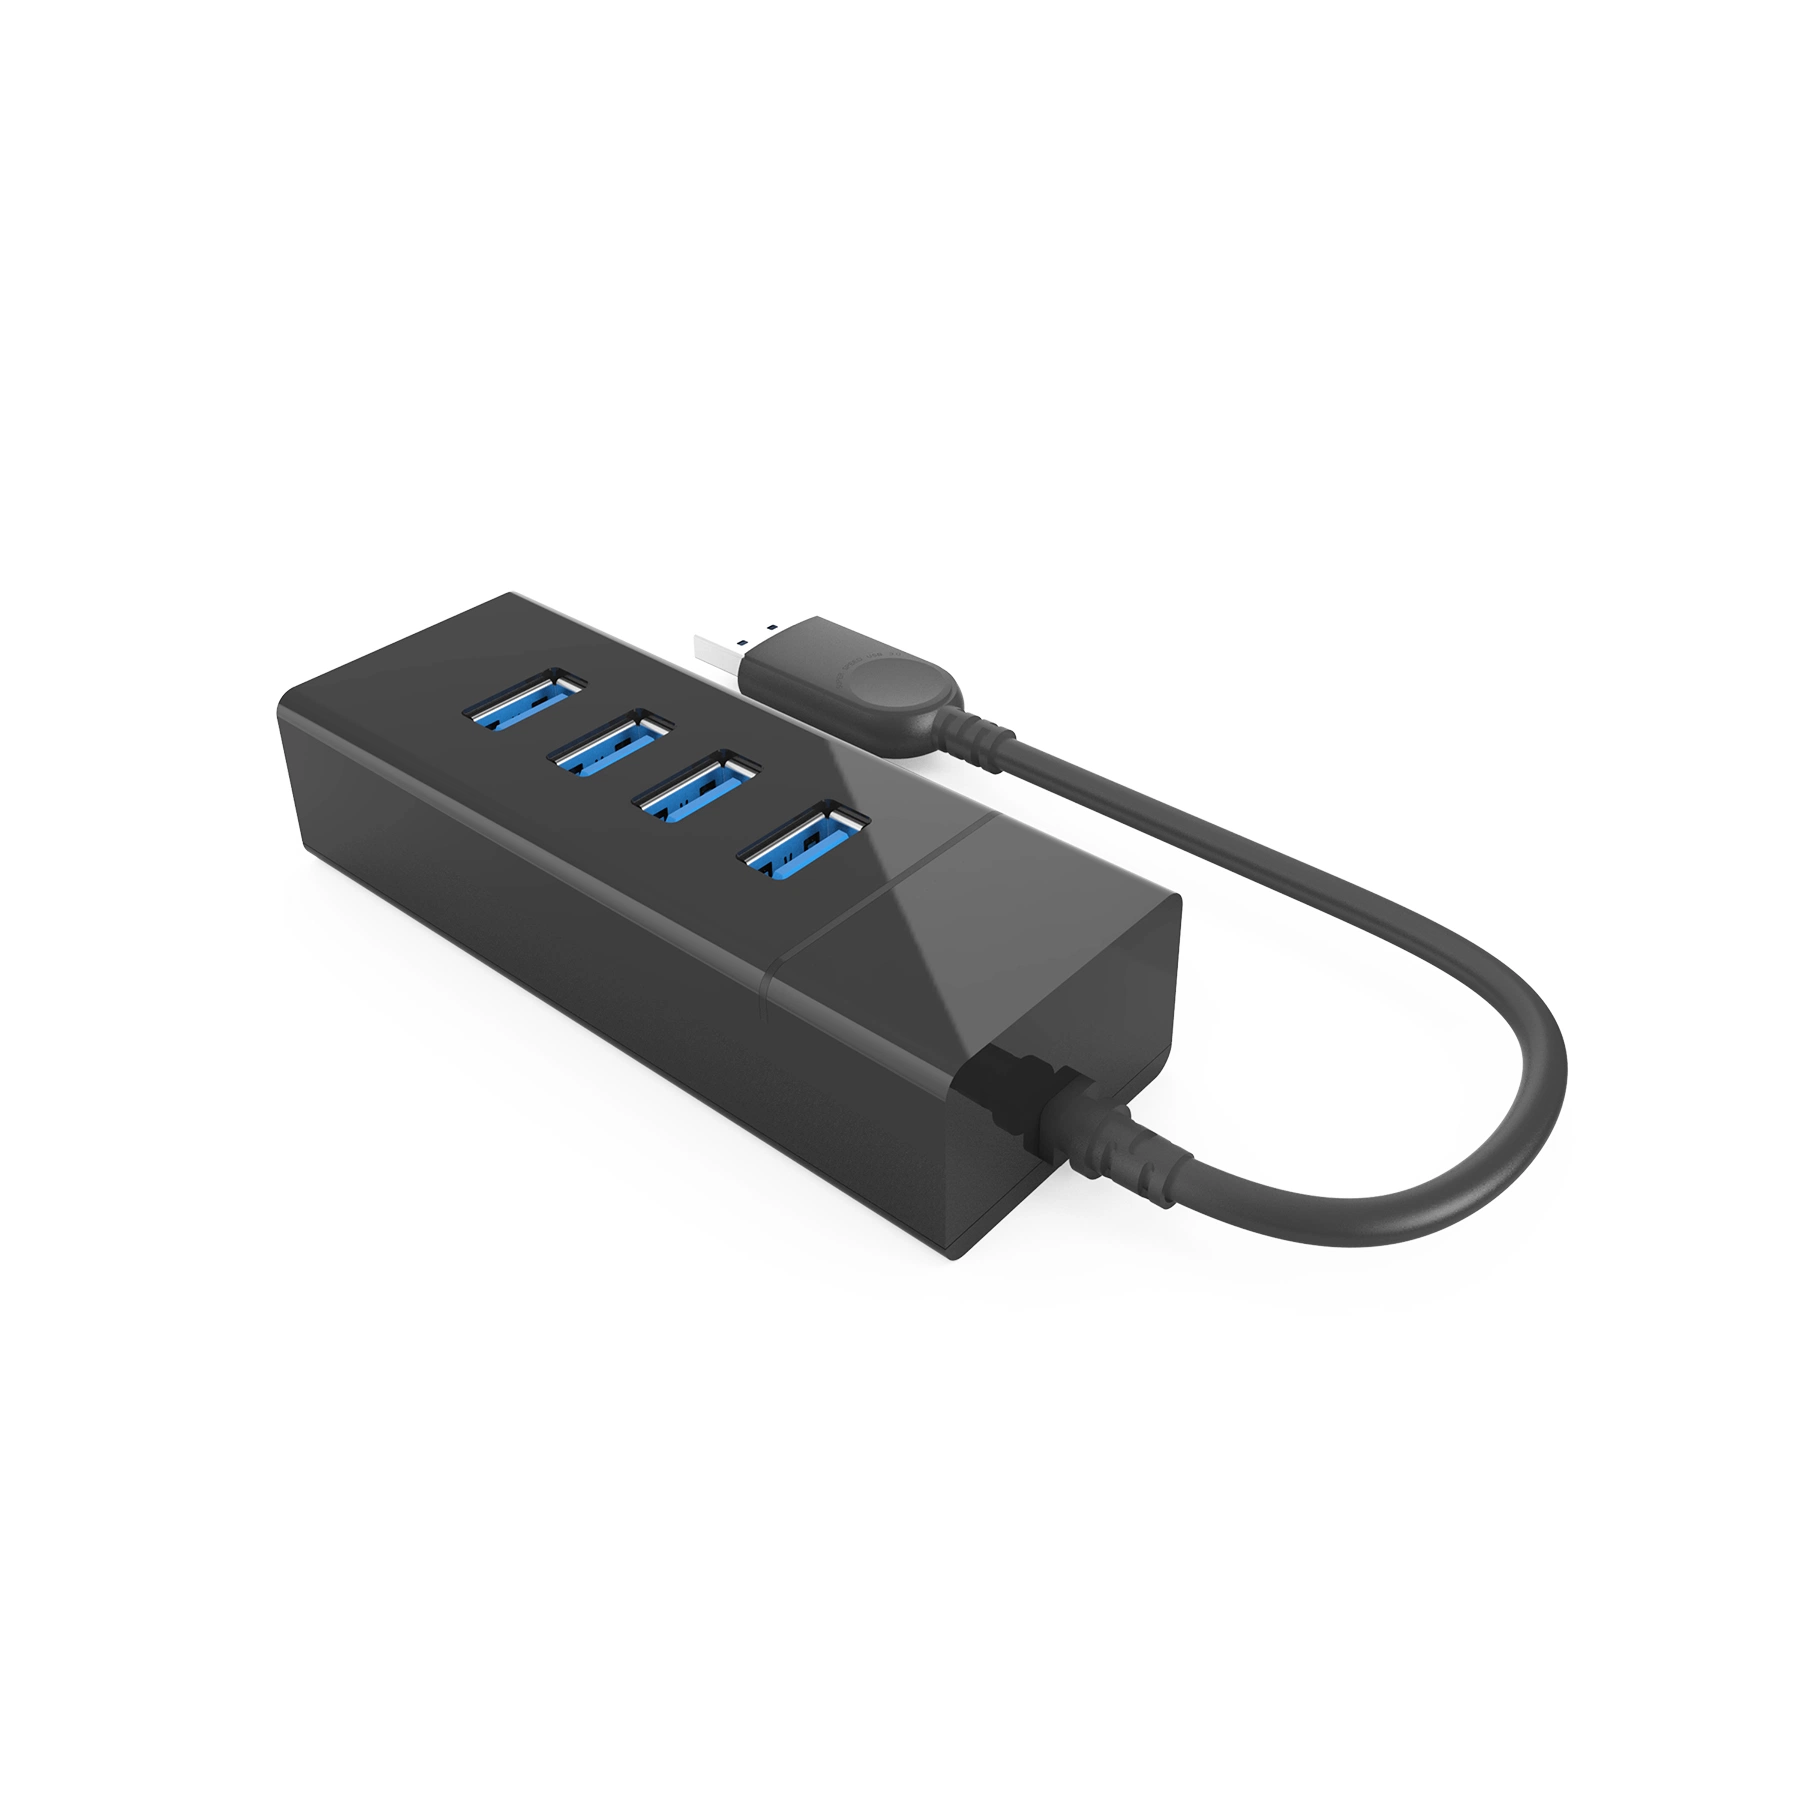 High Quality USB 3.0 4 Port Hub with Individual Power Switches